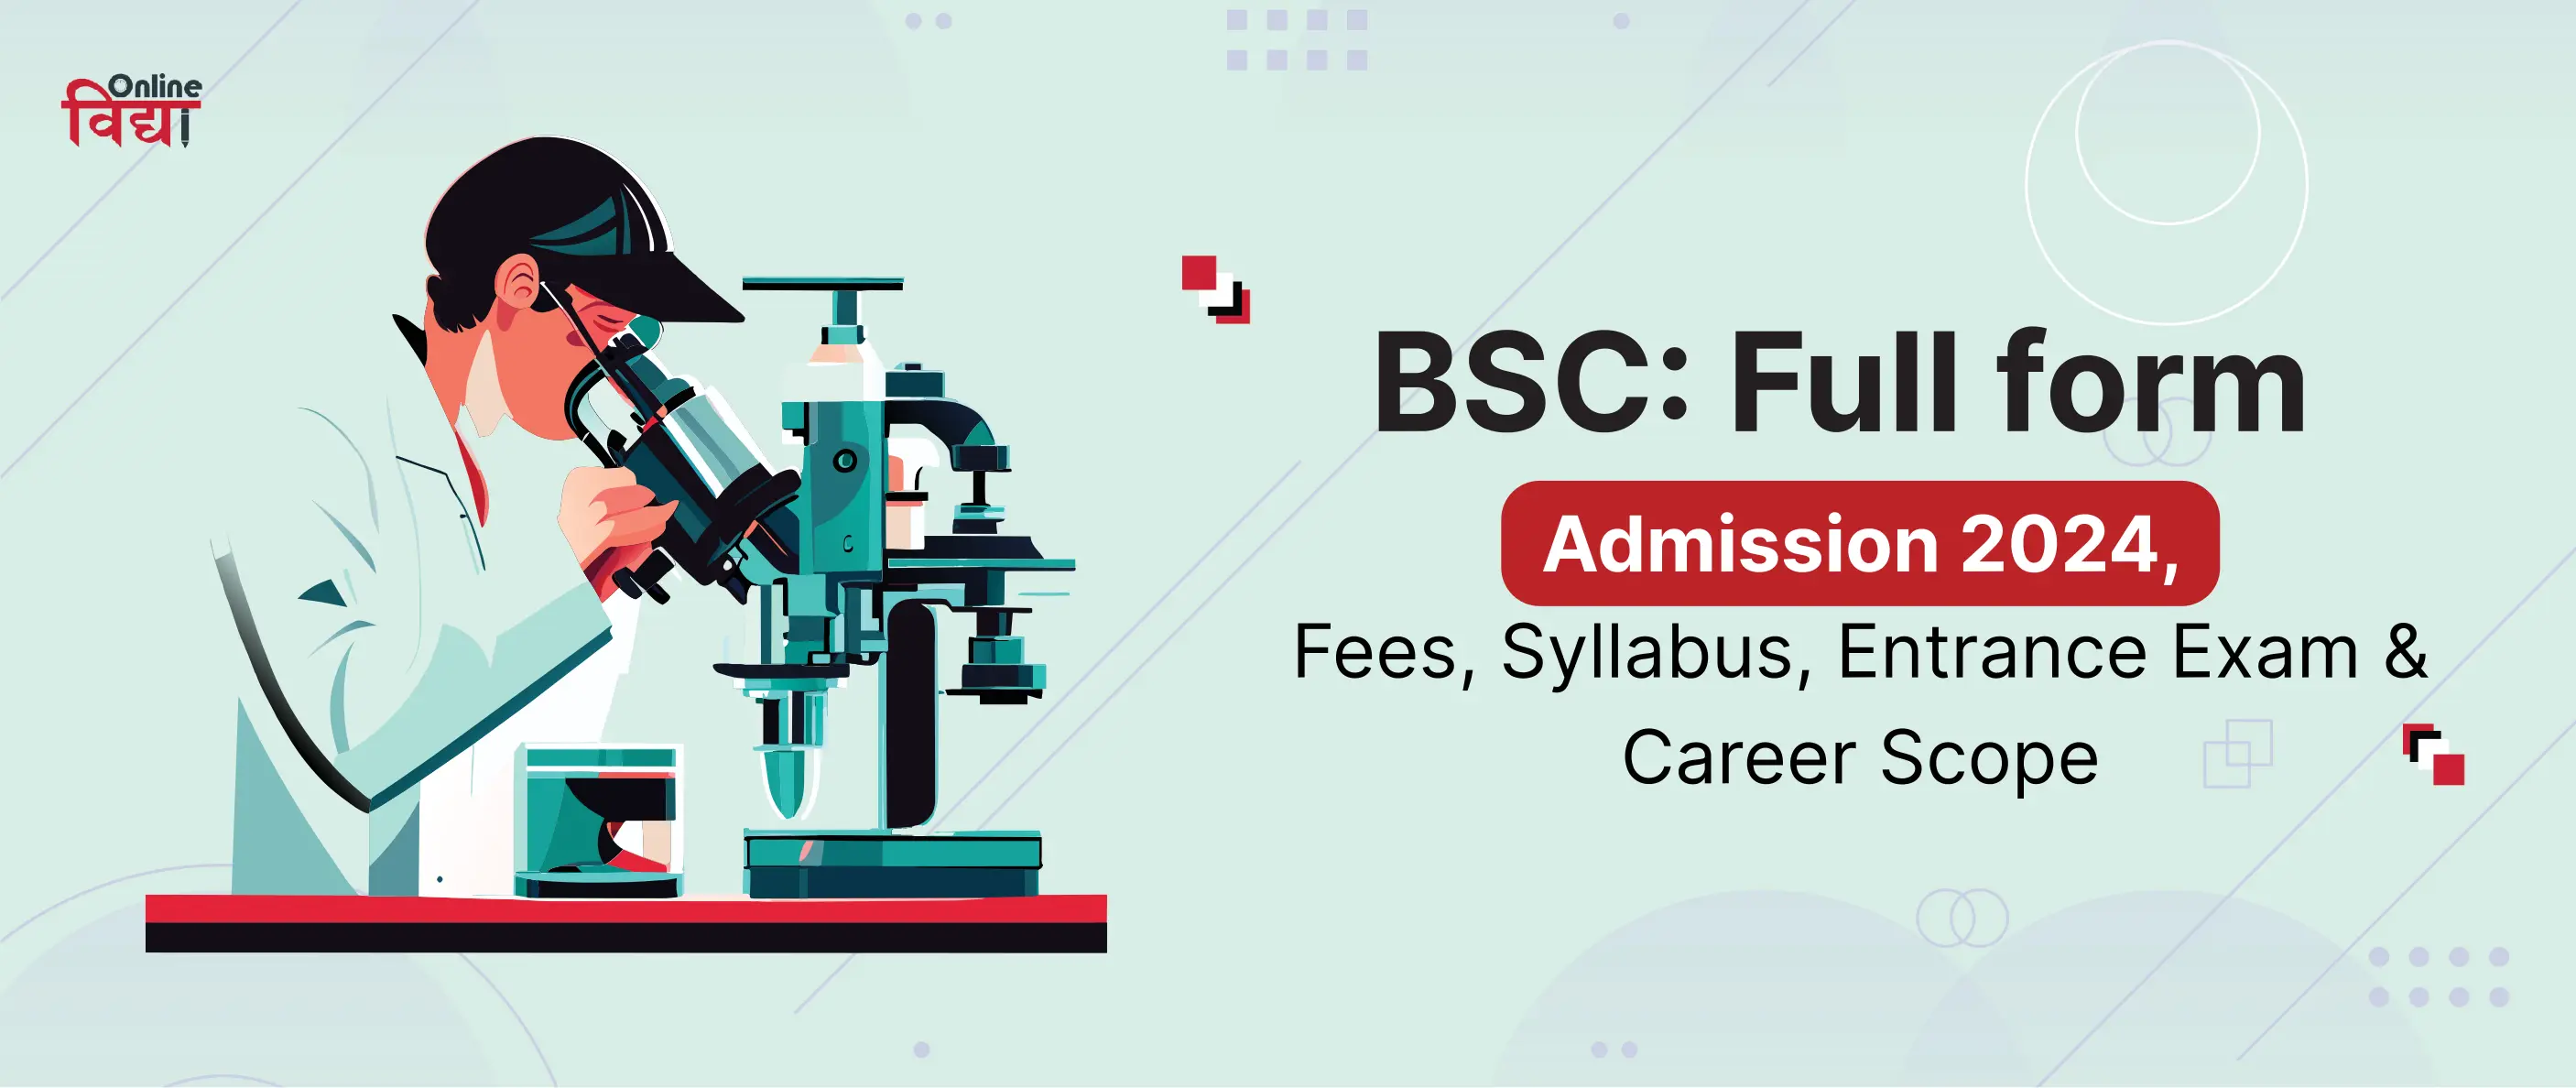 BSC: Full form, Admission 2024, Fees, Syllabus, Entrance Exam & Career Scope